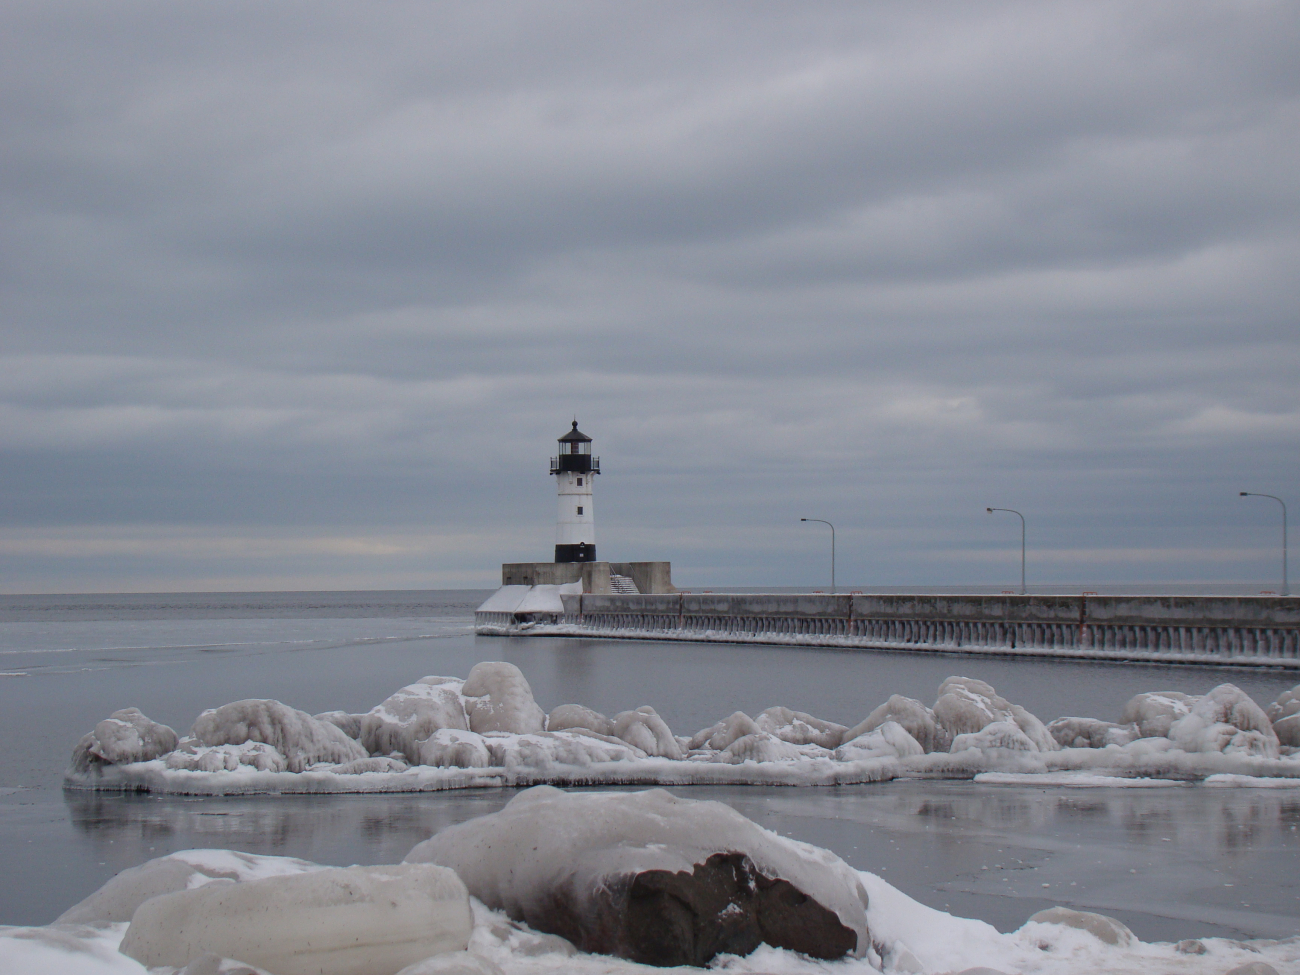 Canal Park Pier ramp and Duluth Harbor Lighthouse on a cloudy winter day